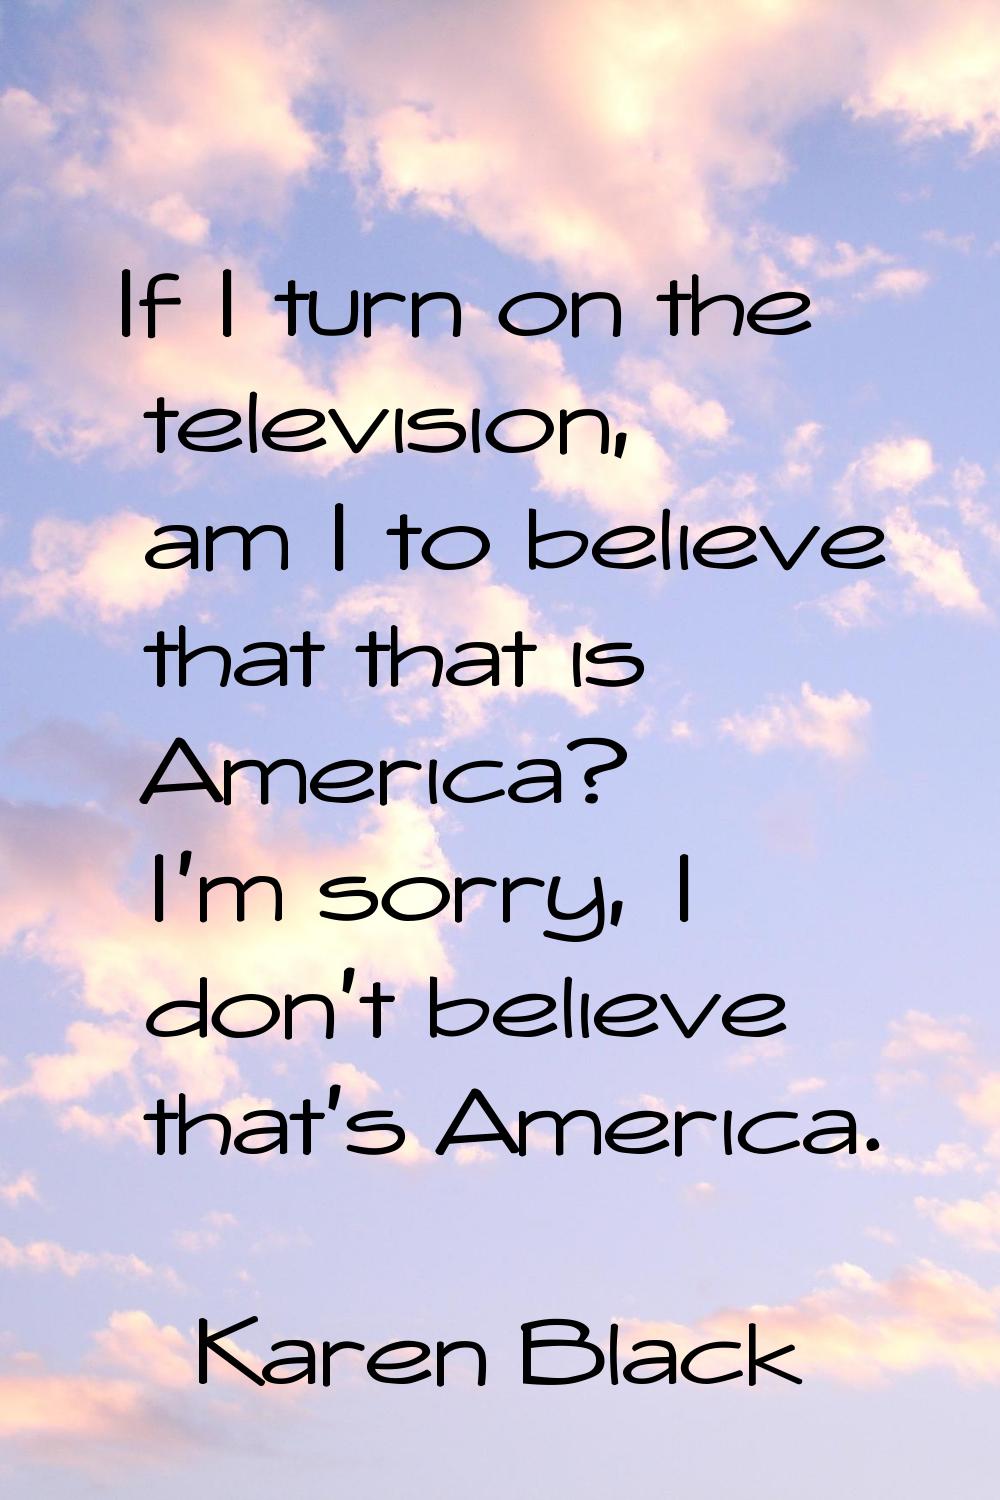 If I turn on the television, am I to believe that that is America? I'm sorry, I don't believe that'